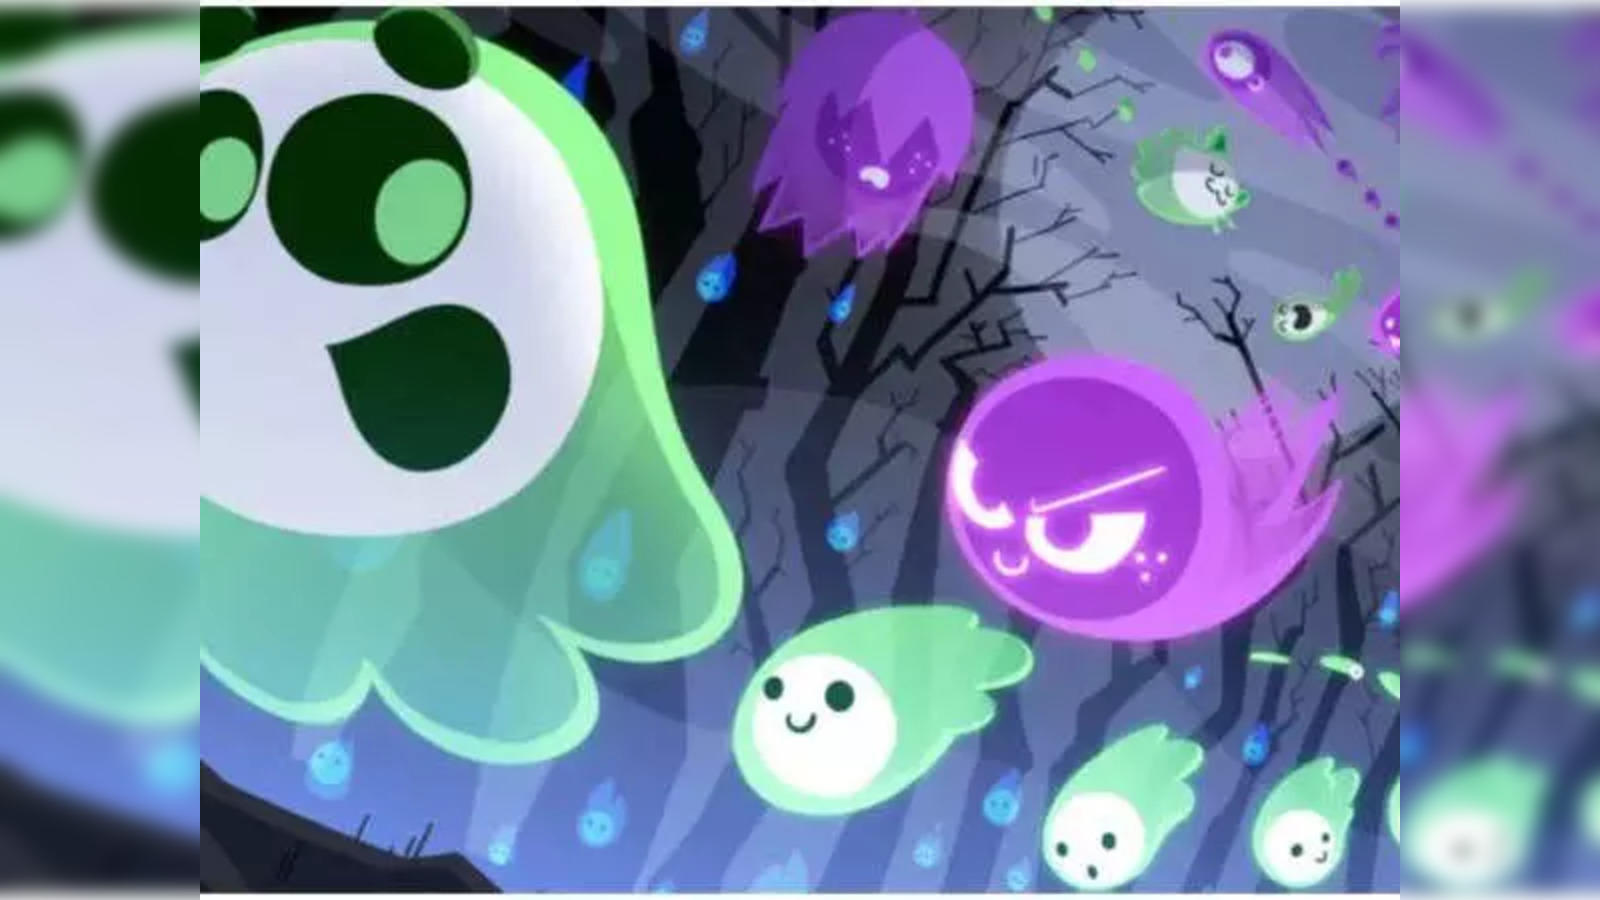 Google's latest Doodle celebrates Halloween as a multiplayer game